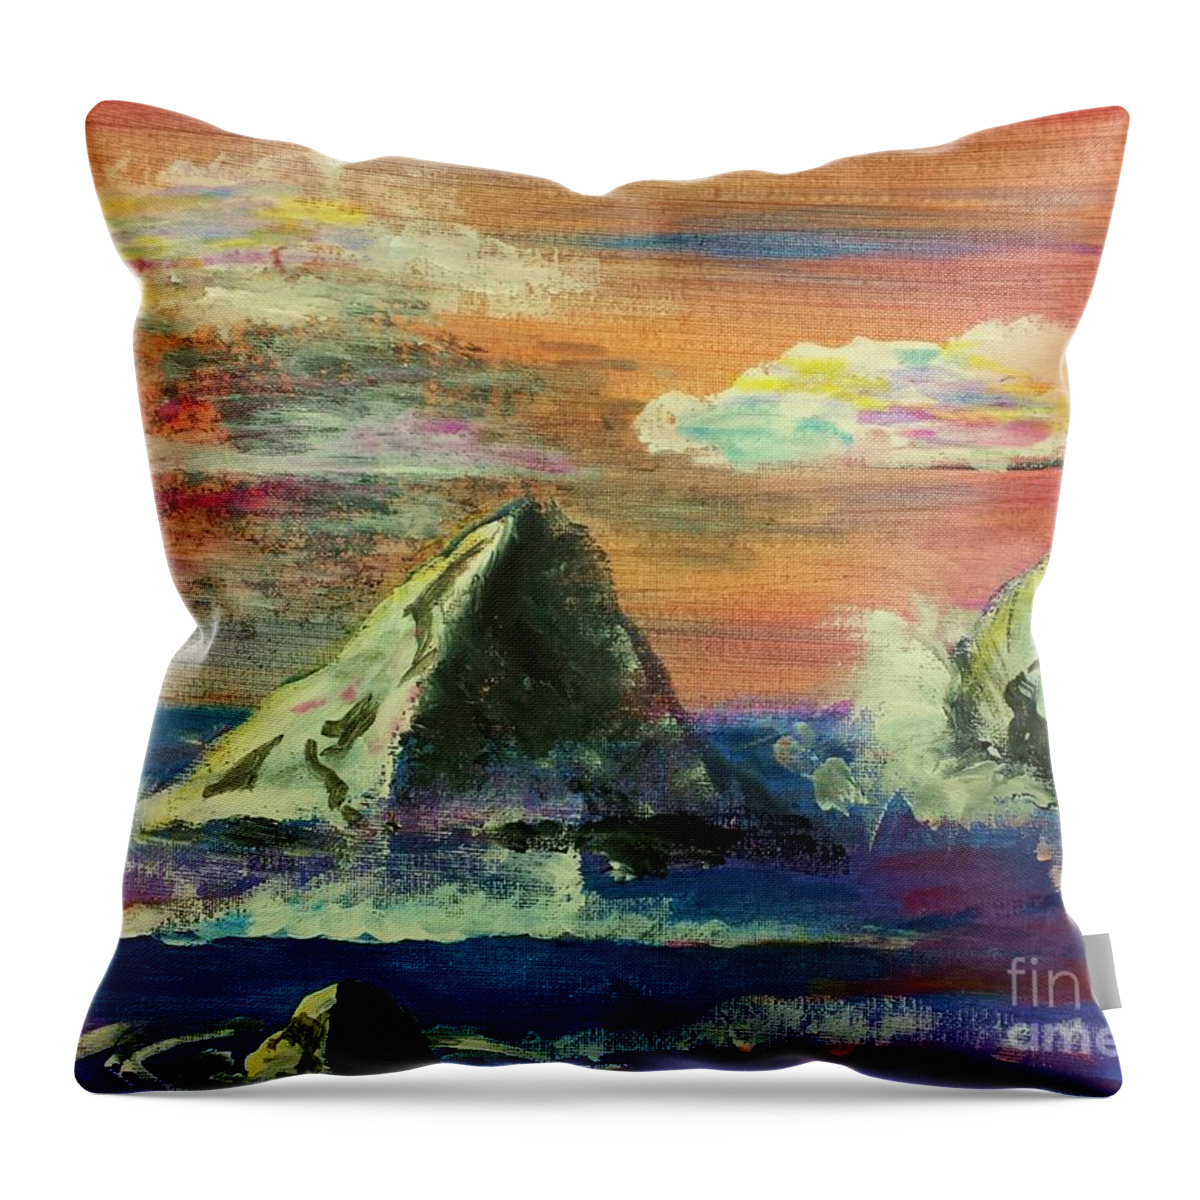 Ocean Throw Pillow featuring the painting Twilight Sea Rocks by Judy Via-Wolff